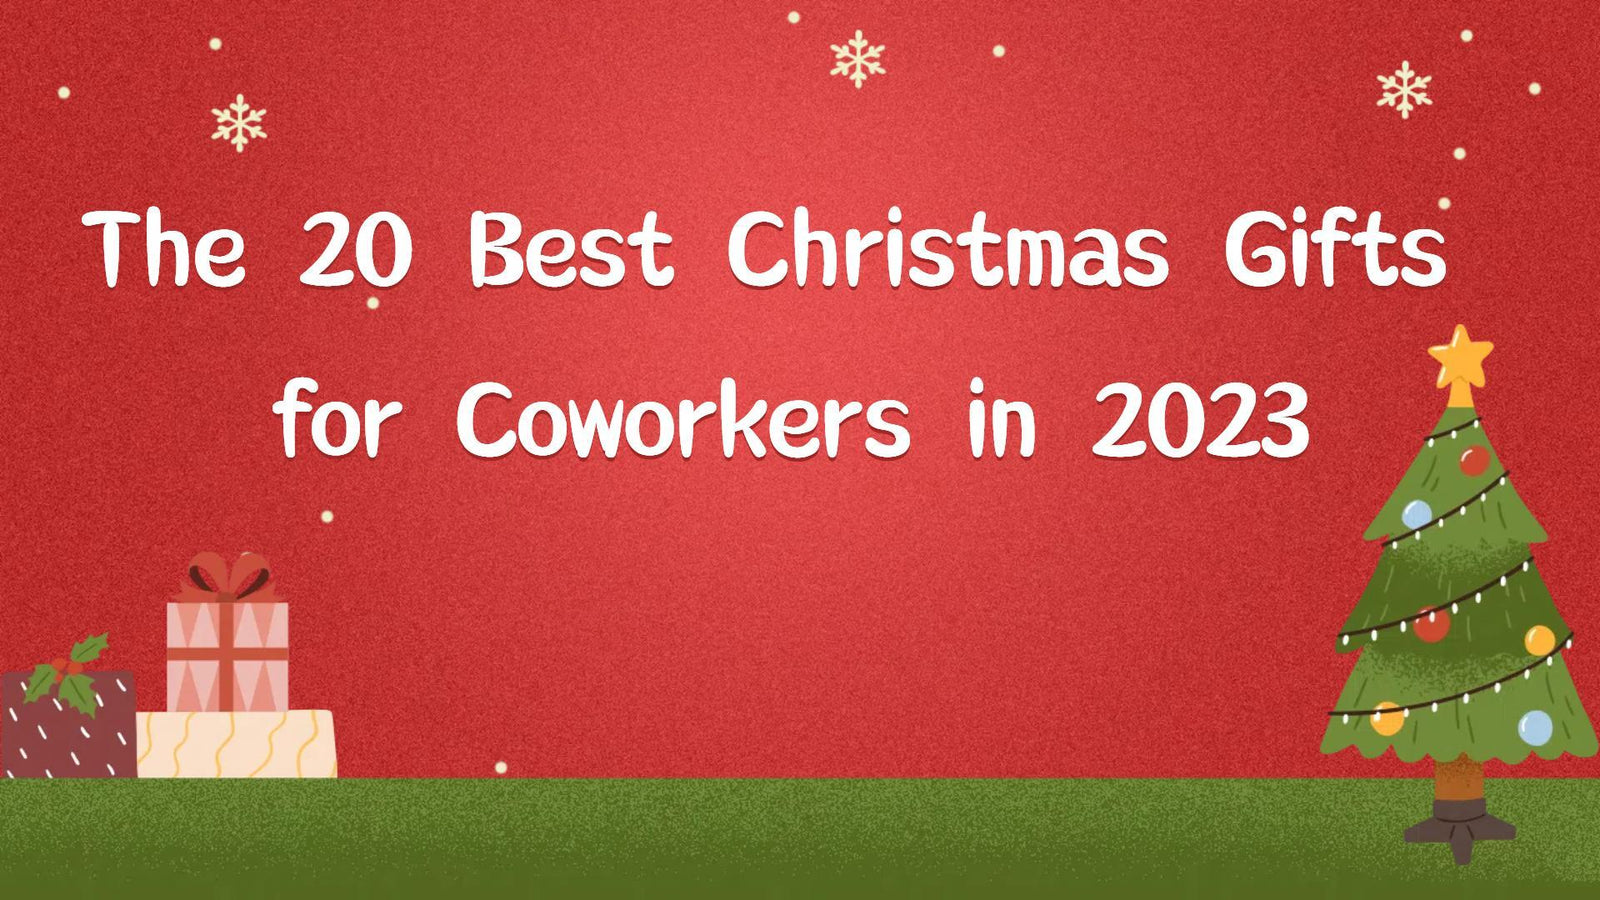 The 20 Best Christmas Gifts for Coworkers in 2023